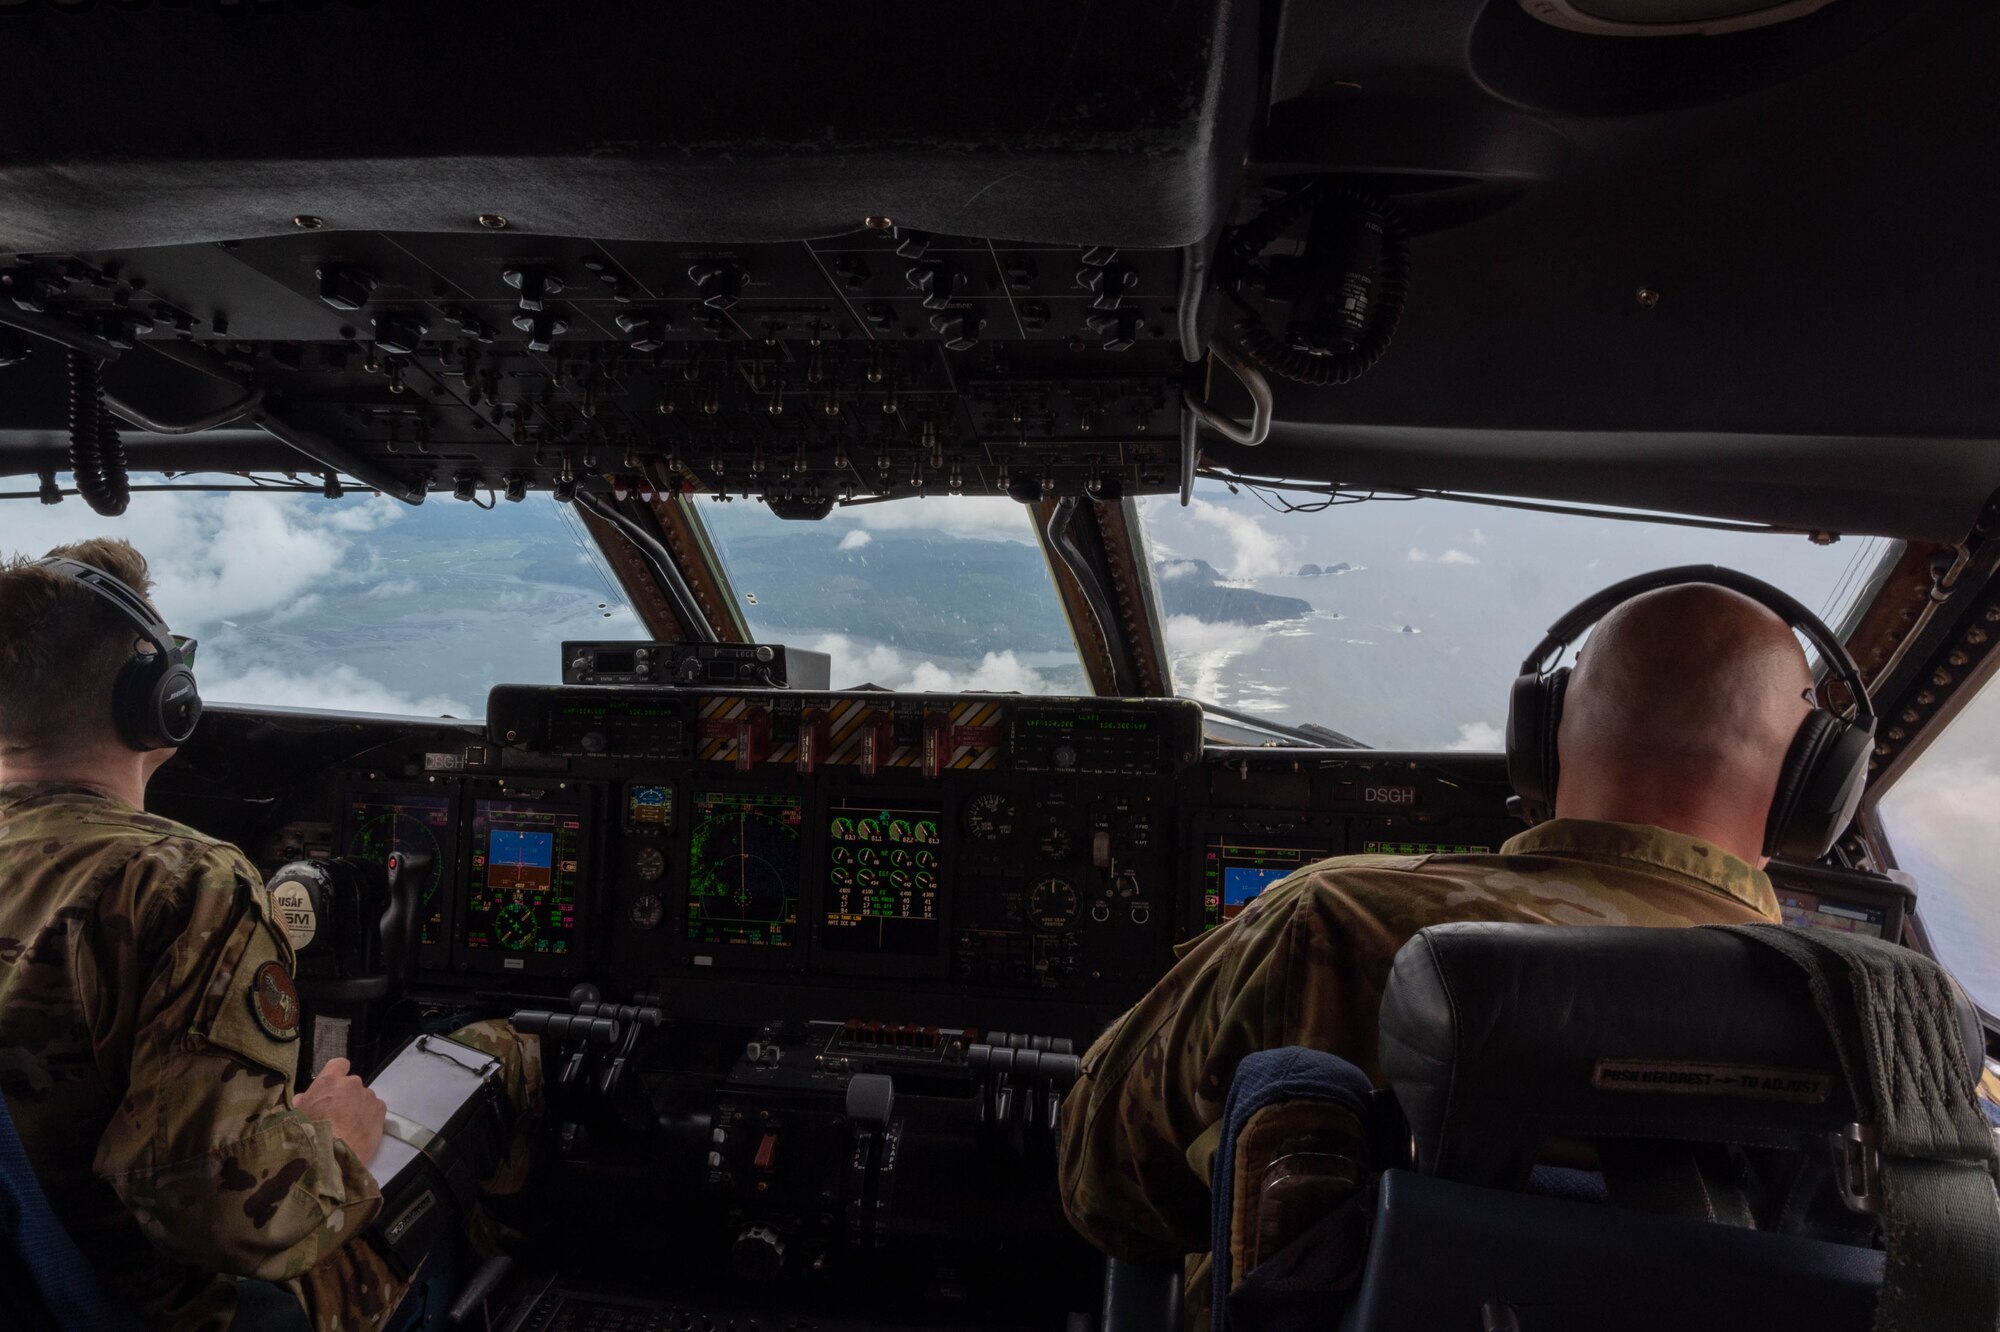 Capt. Shawn Moore, left, and Capt. Dustin Suire, both 9th Airlift Squadron pilots fly a Dover Air Force Base C-5M Super Galaxy on a routine training flight over the Oregon Pacific coast, June 5, 2021. During a Major Command Service Tail Trainer, pilots and flight engineers were able to fly over the West Coast using visual flight rules. This requires crew members to use ground references to fly, exercising different skill sets not often used in day-to-day operations. (U.S. Air Force photo by Senior Airman Faith Schaefer)